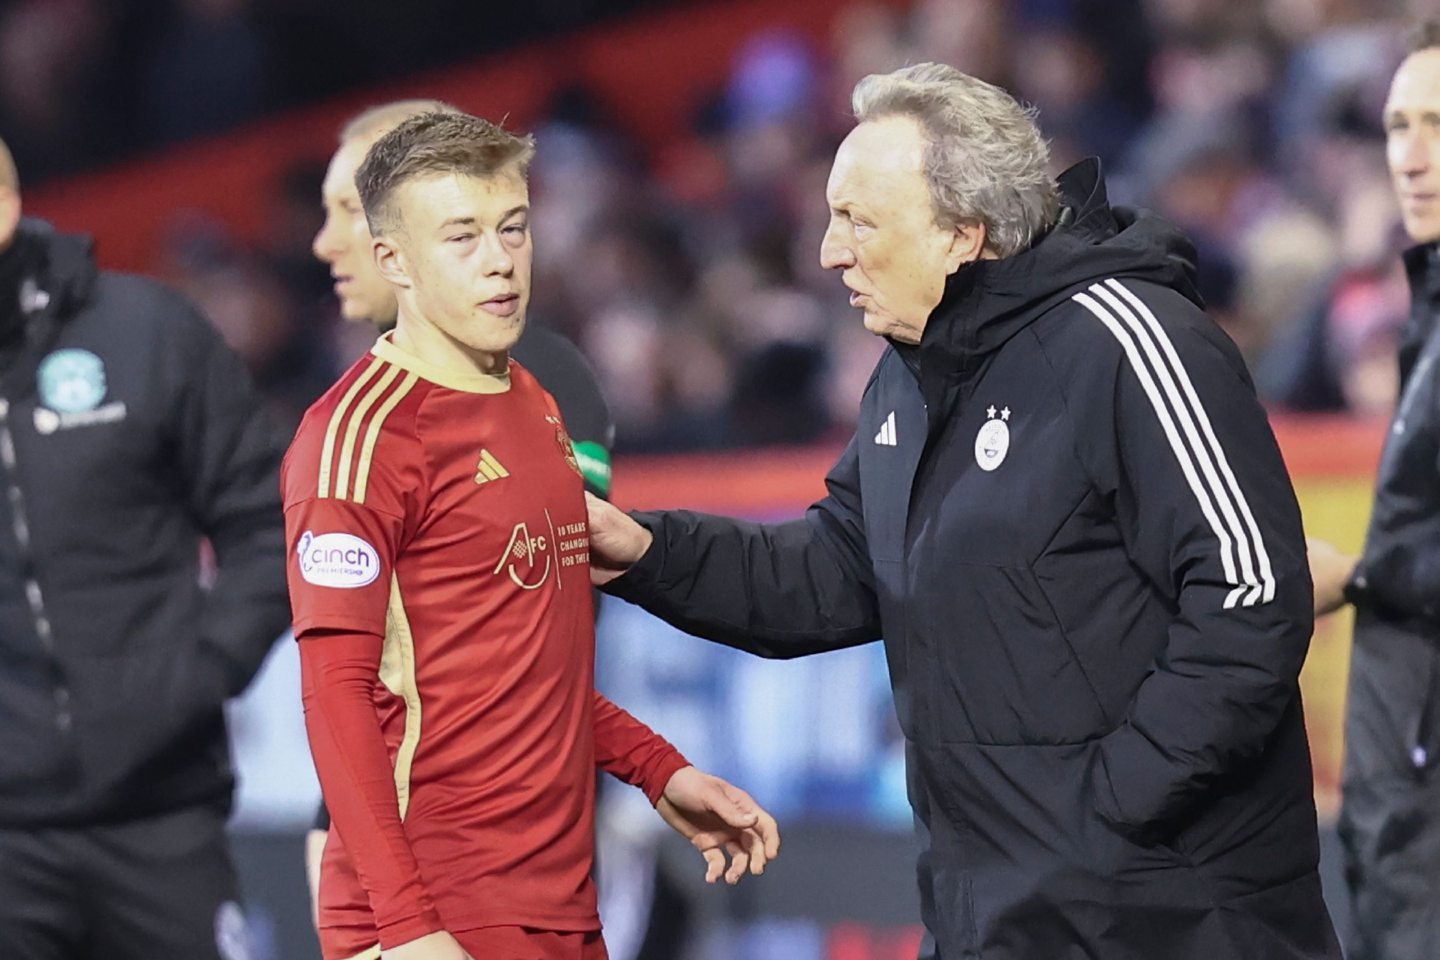 Aberdeen manager talks with Connor Barron in the 2-0 loss at Kilmarnock. Image: Shutterstock 